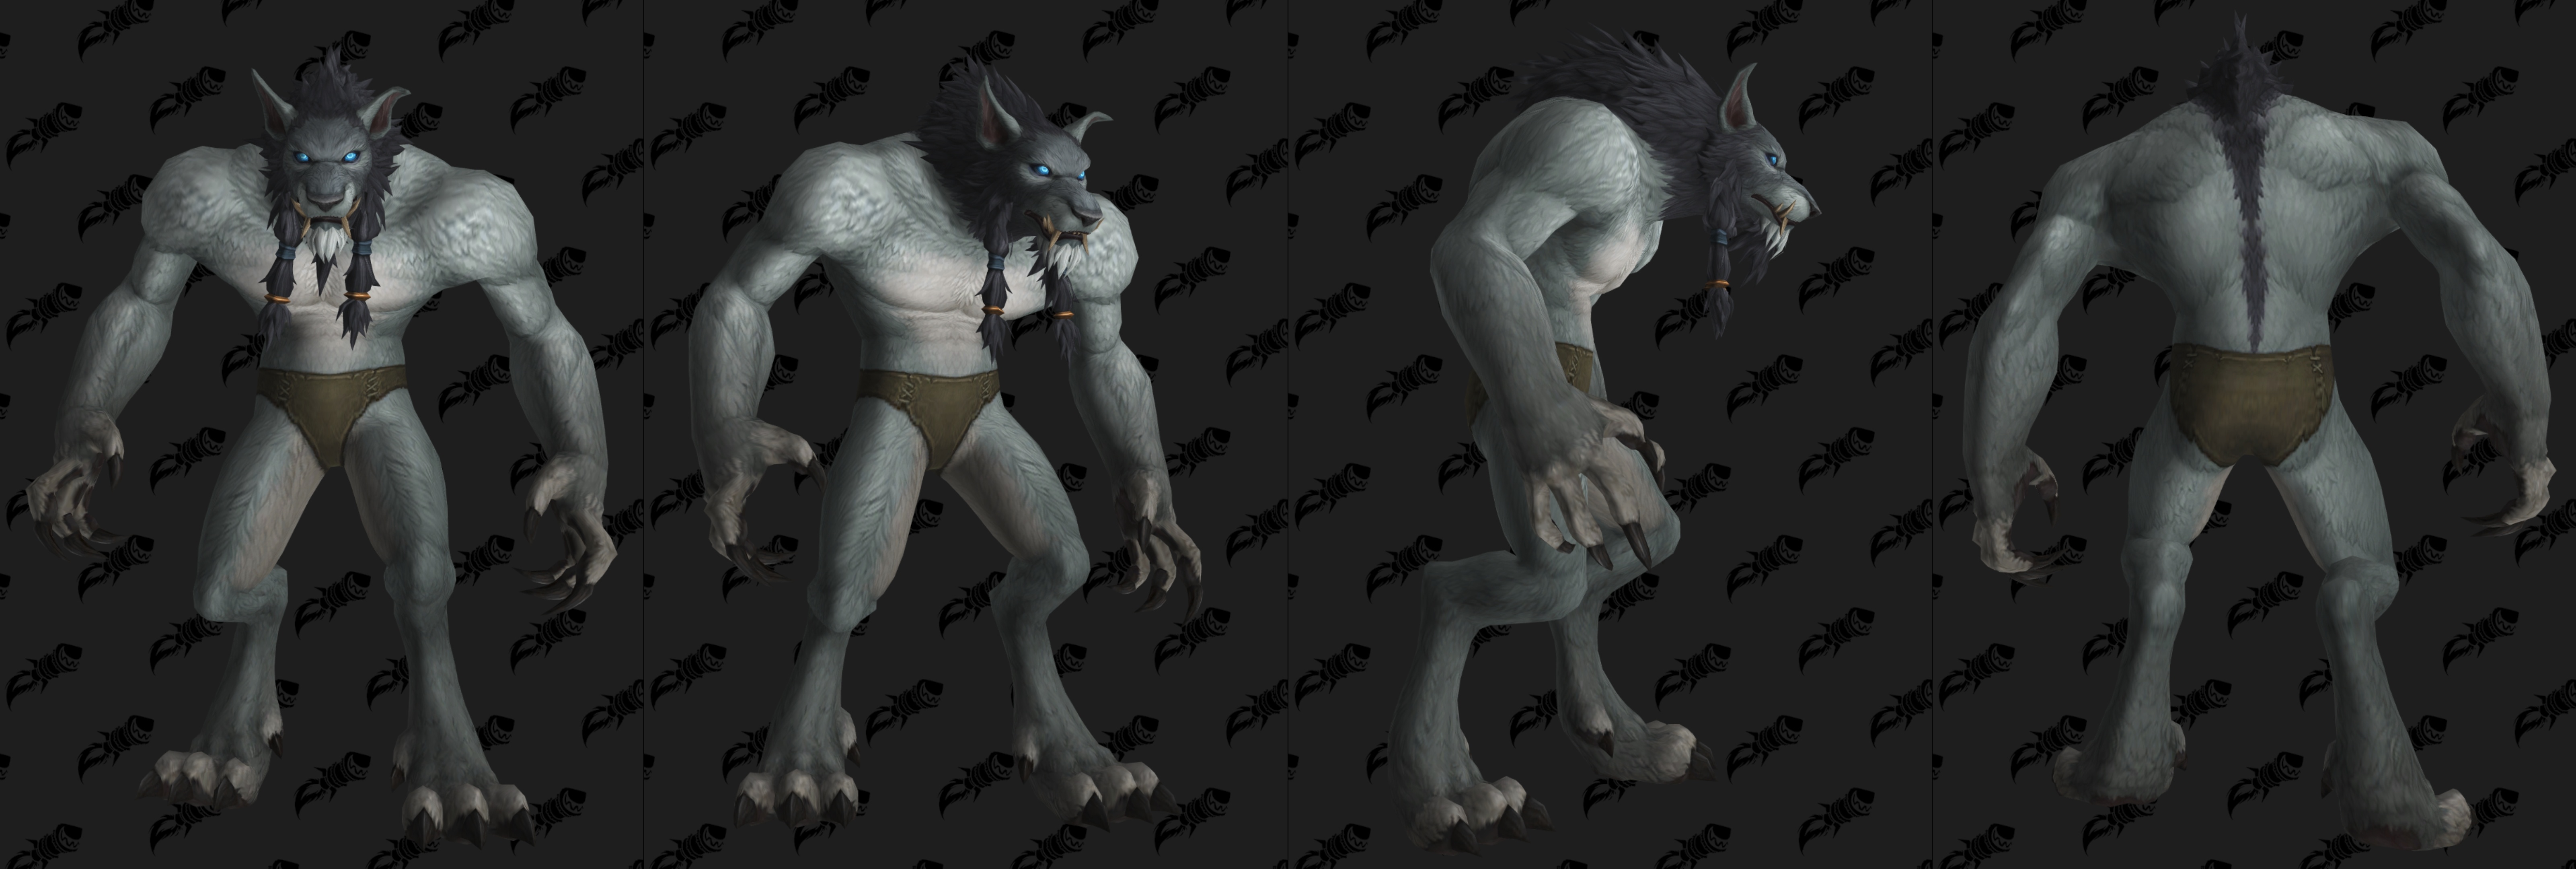 New Worgen Models Available On Wowhead Thoughts